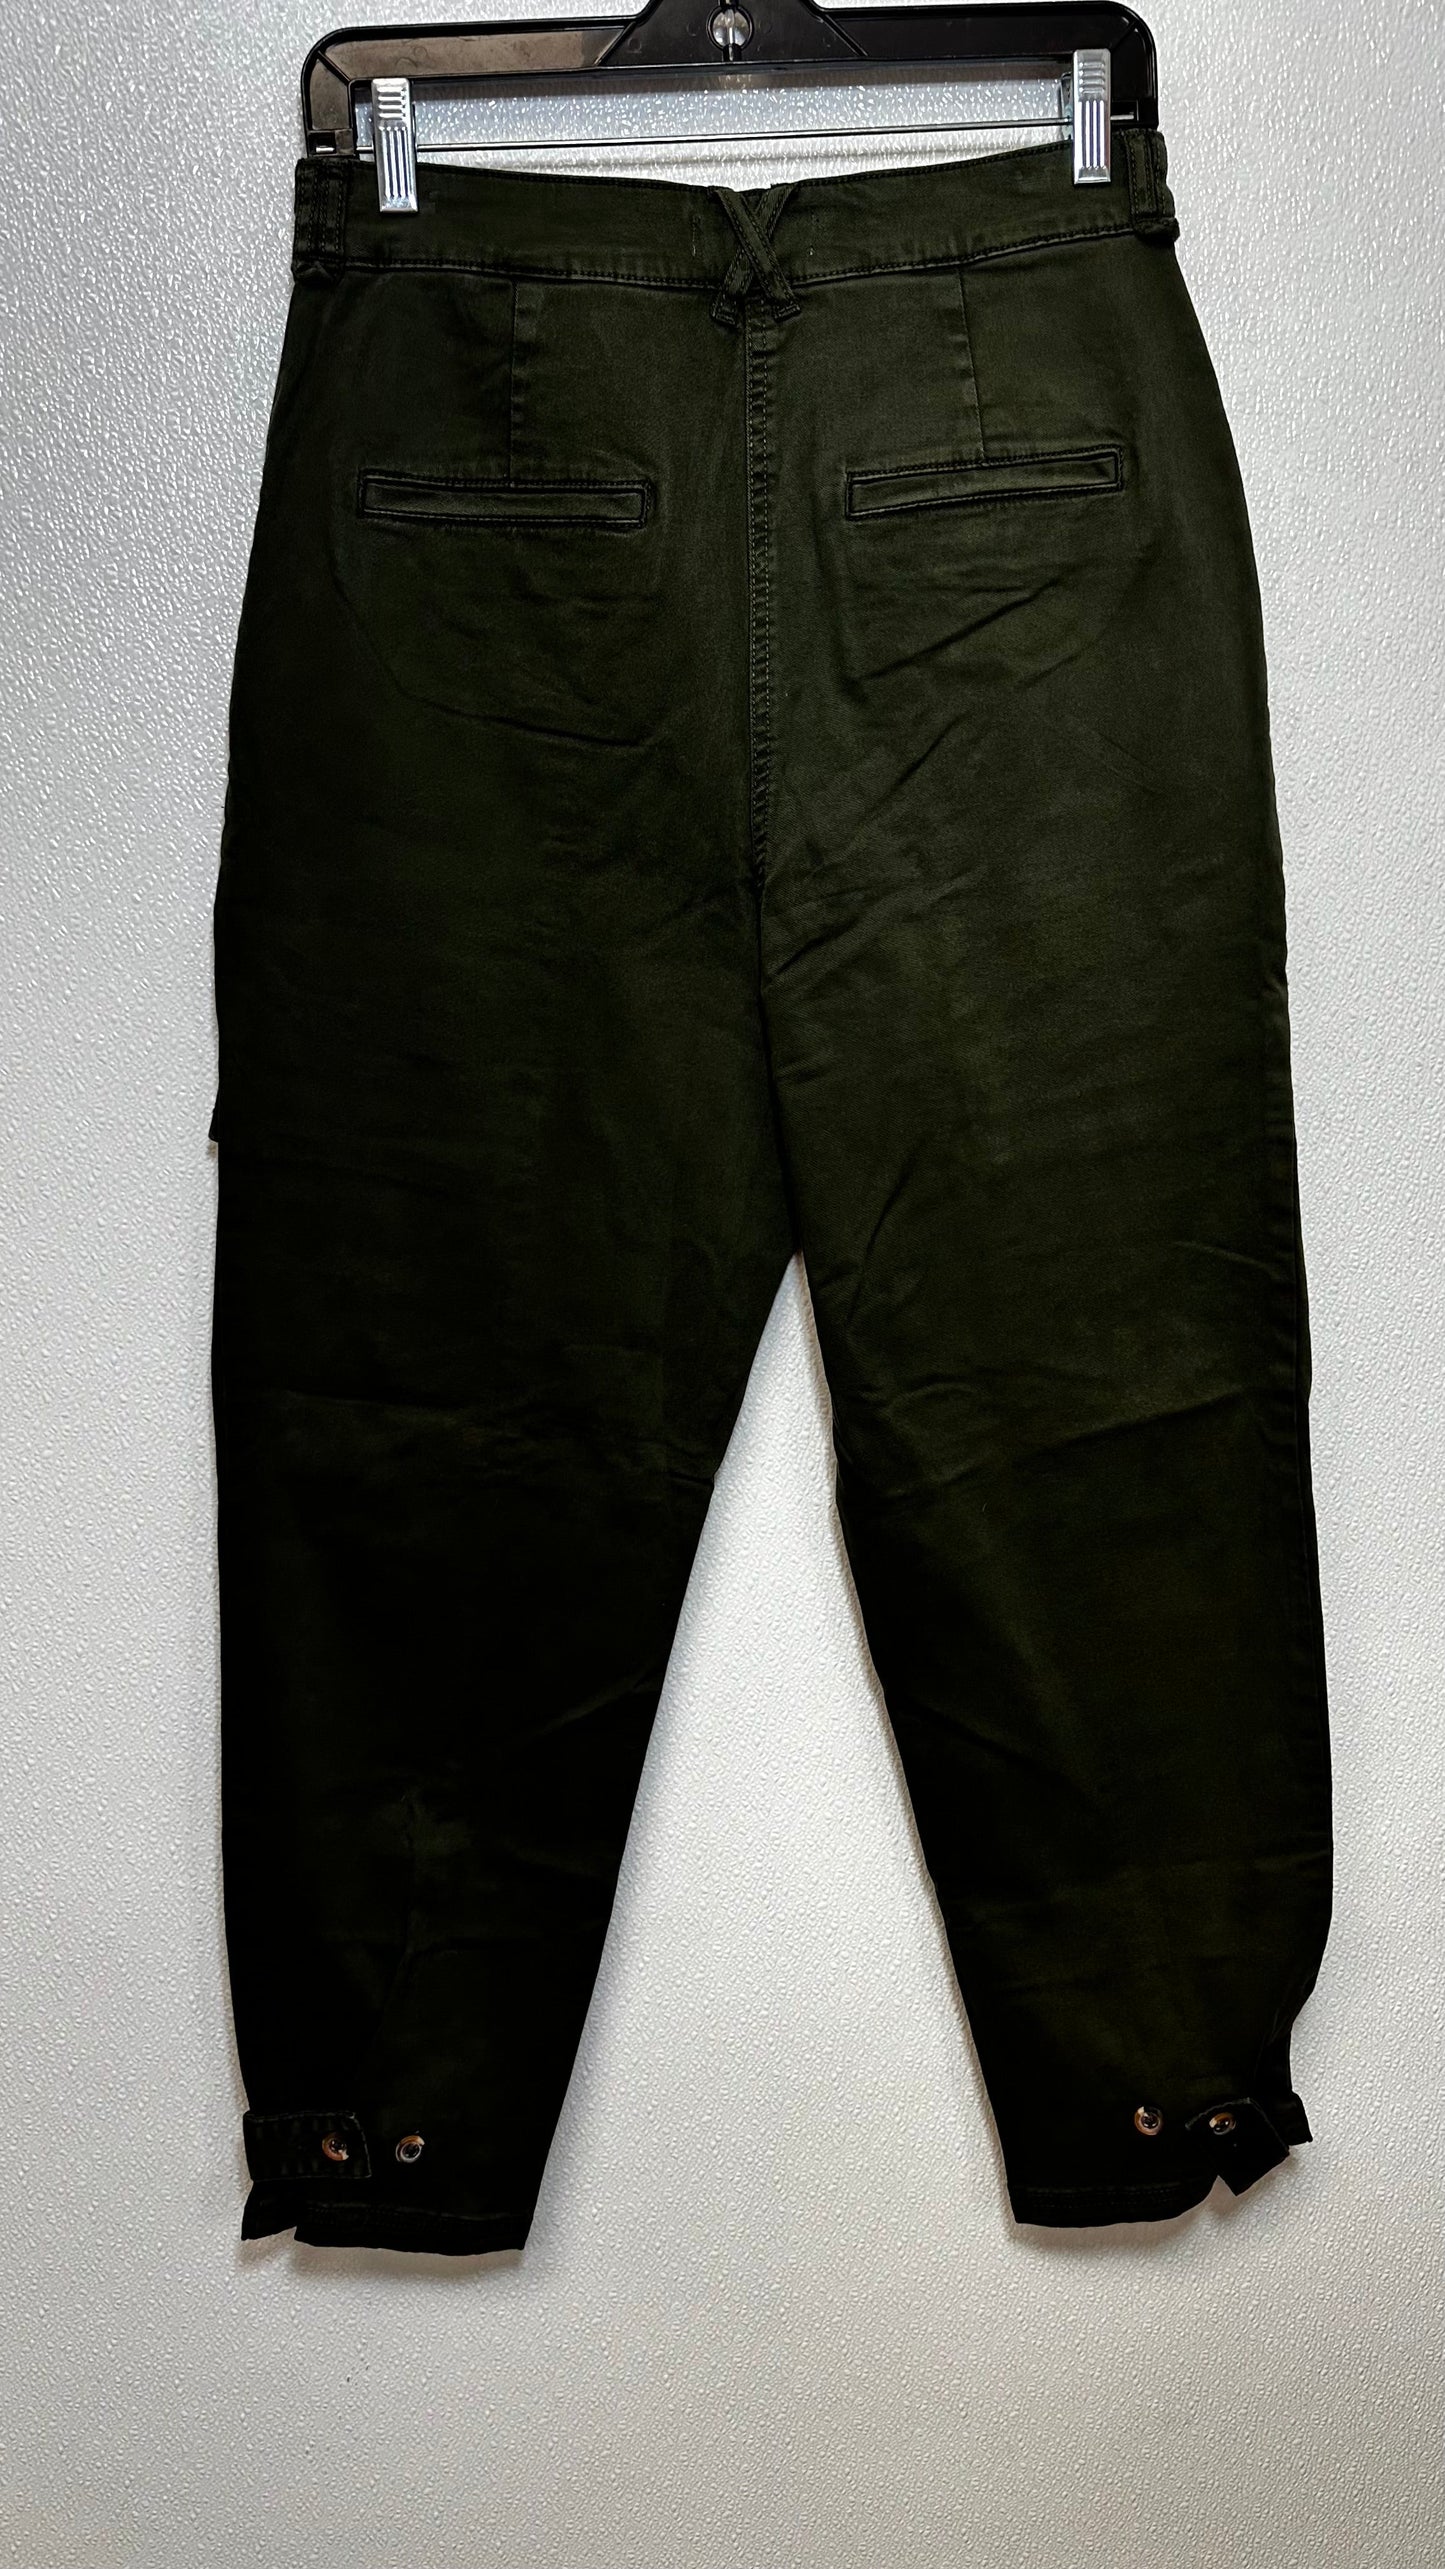 Green Pants Ankle H&m, Size 8